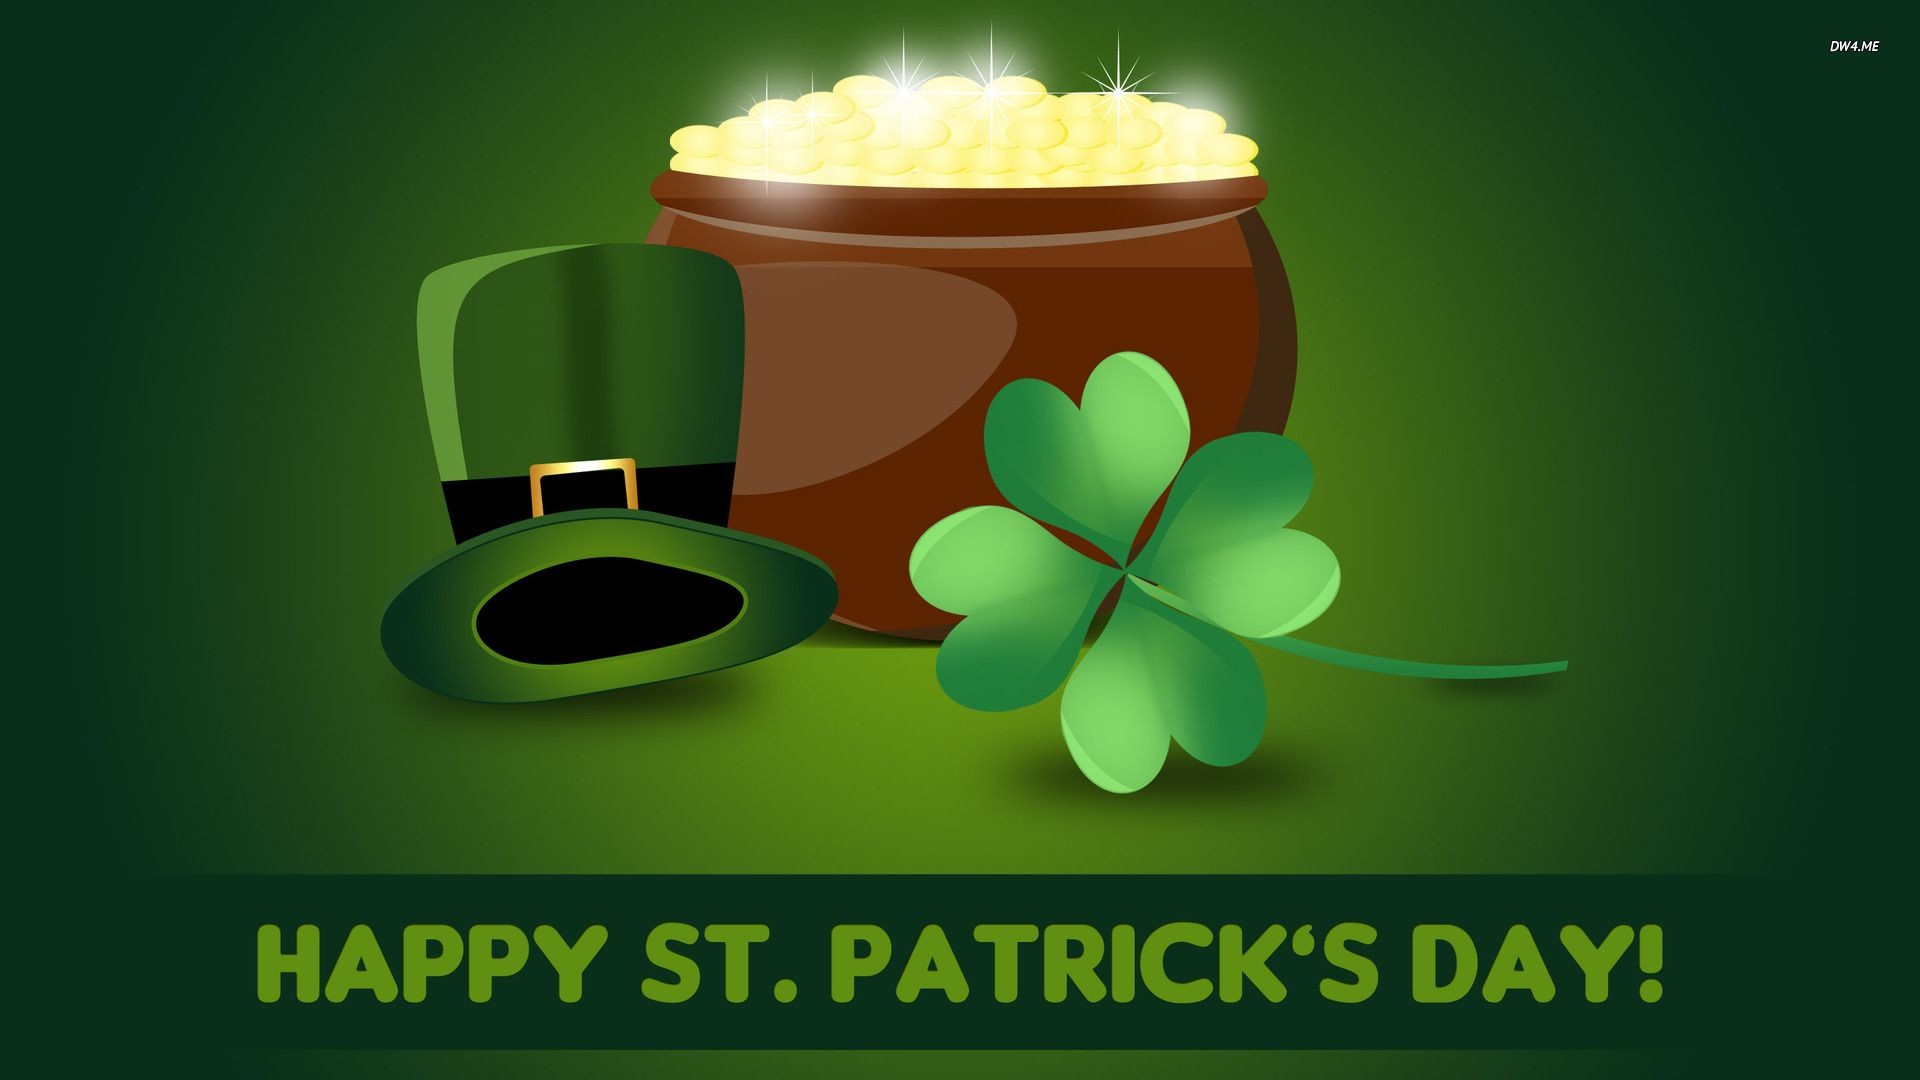 1920x1080 1920x1200 Free St Patrick Day Wallpapers Group (62+)">